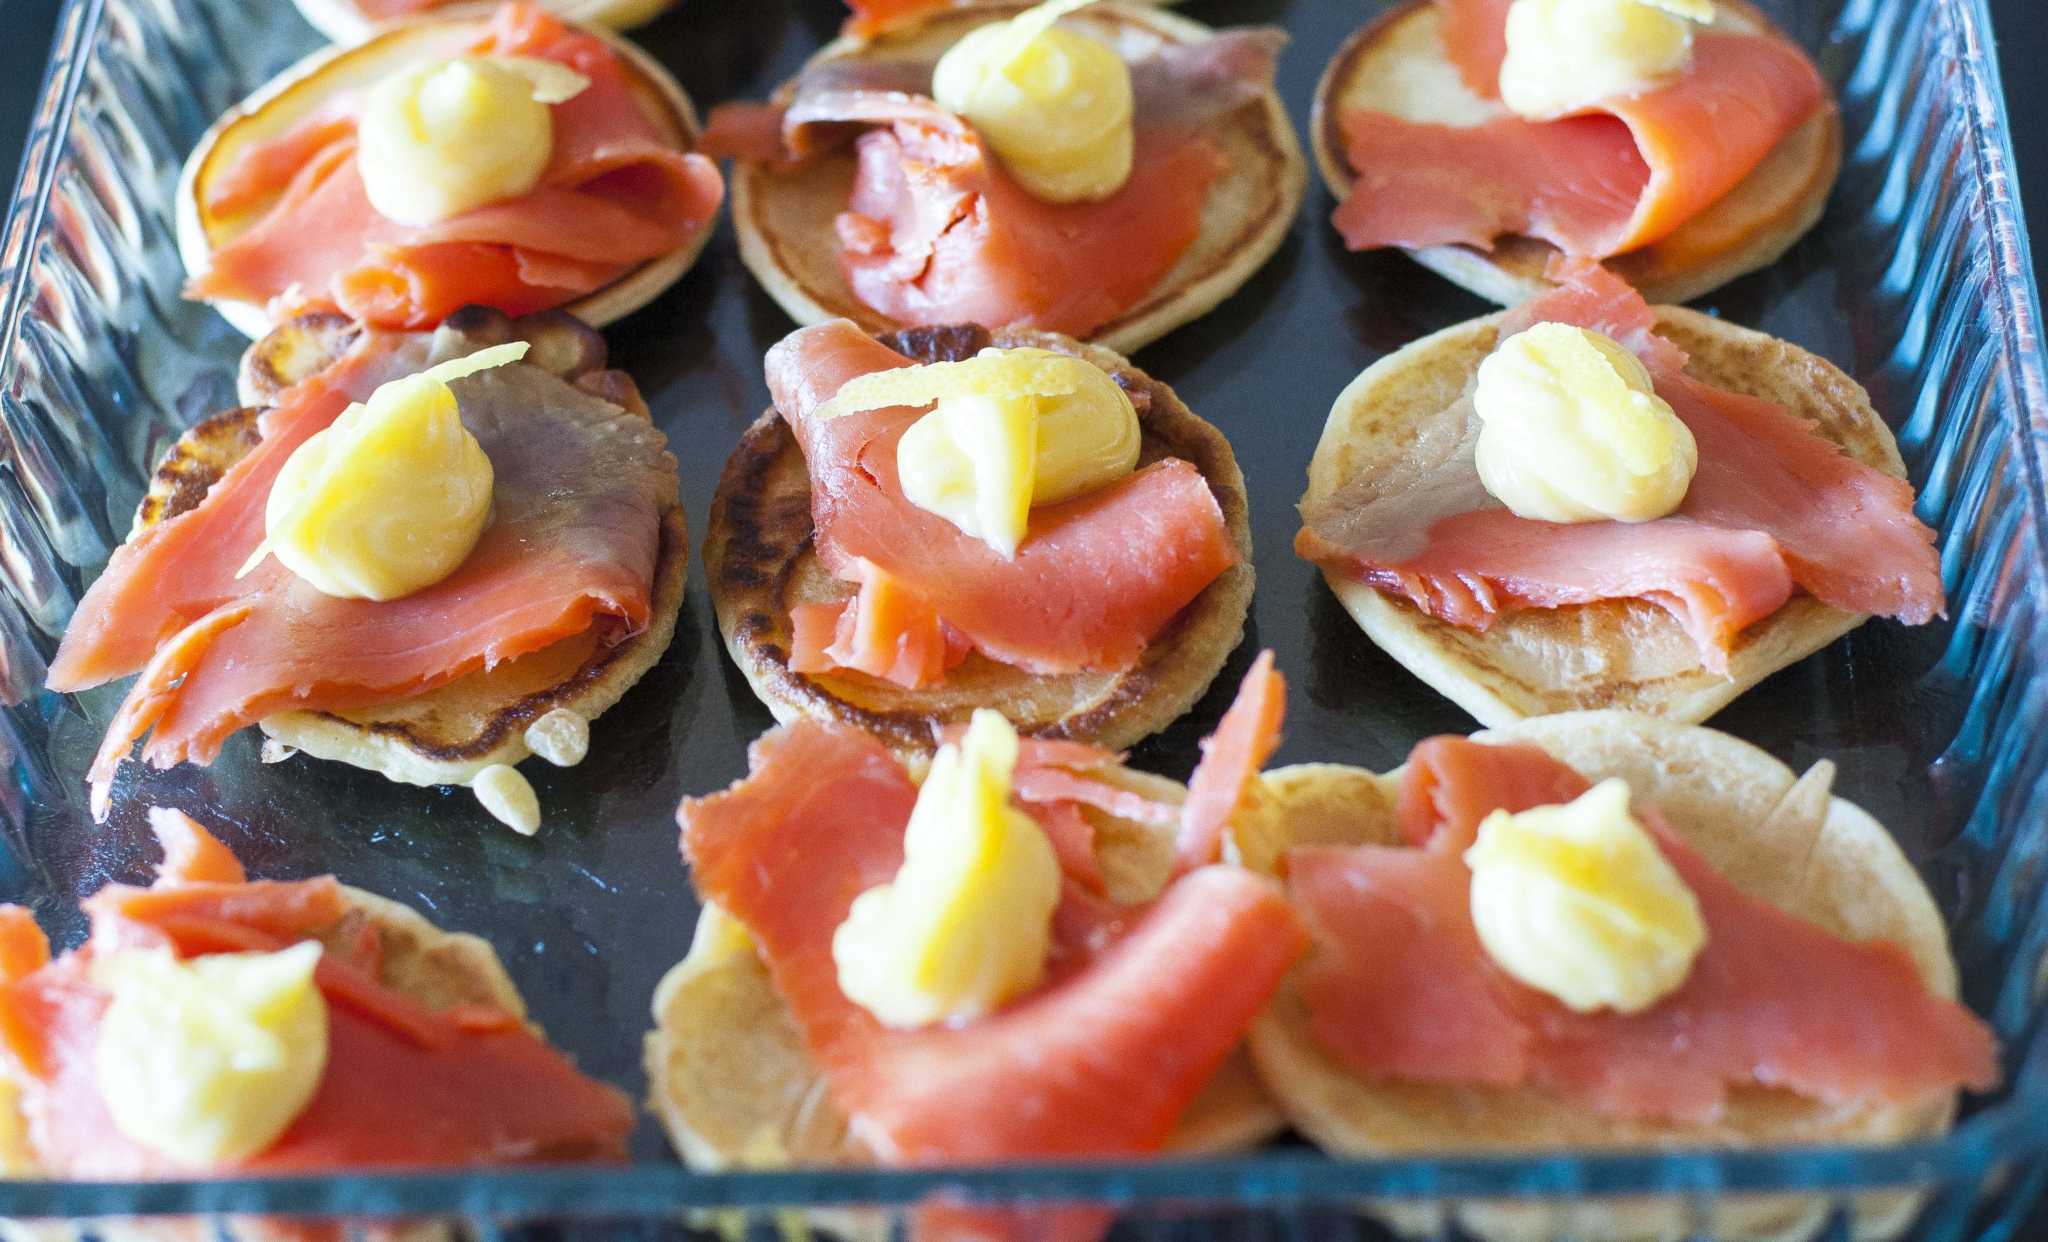 Assemble Blini with smoked salmon